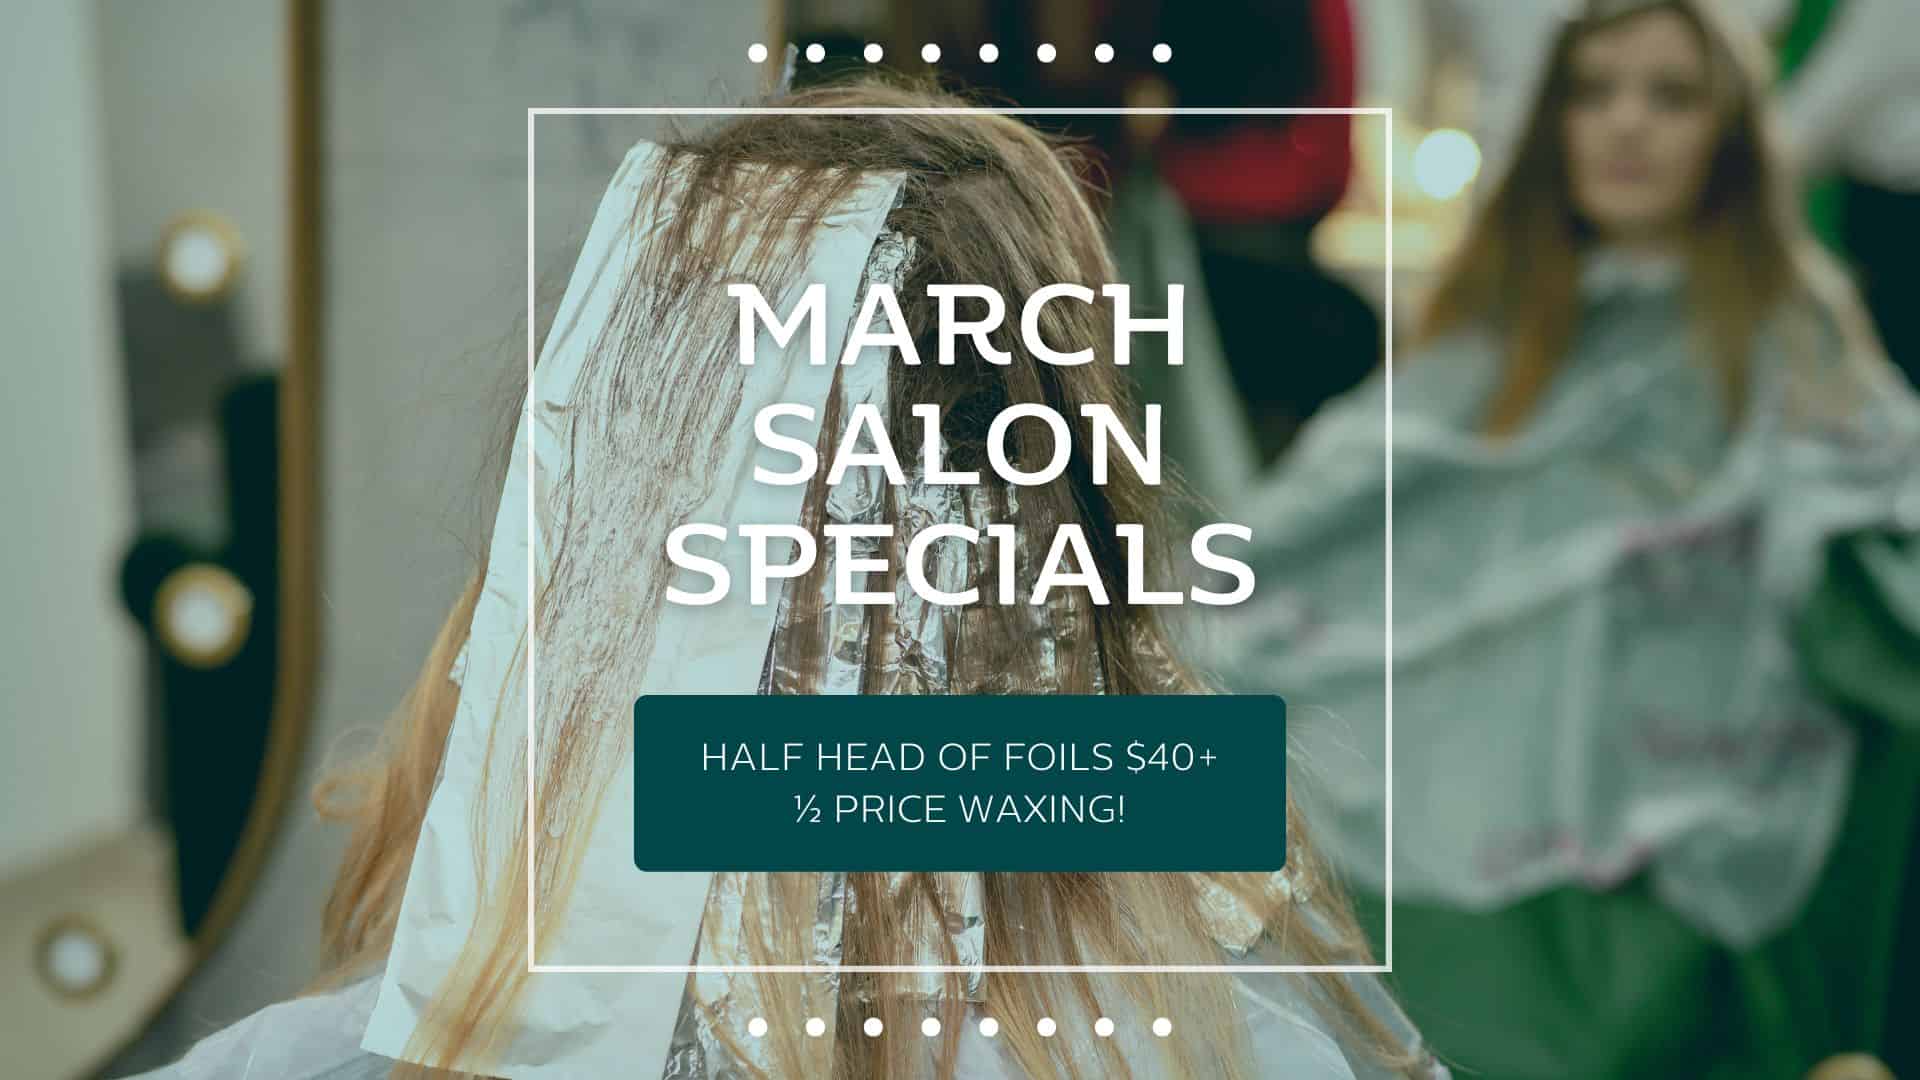 Featured image for https://www.cbbccareercollege.ca/upcoming-events/march-salon-specials-half-head-of-foils-40-and-%c2%bd-price-waxing/ event